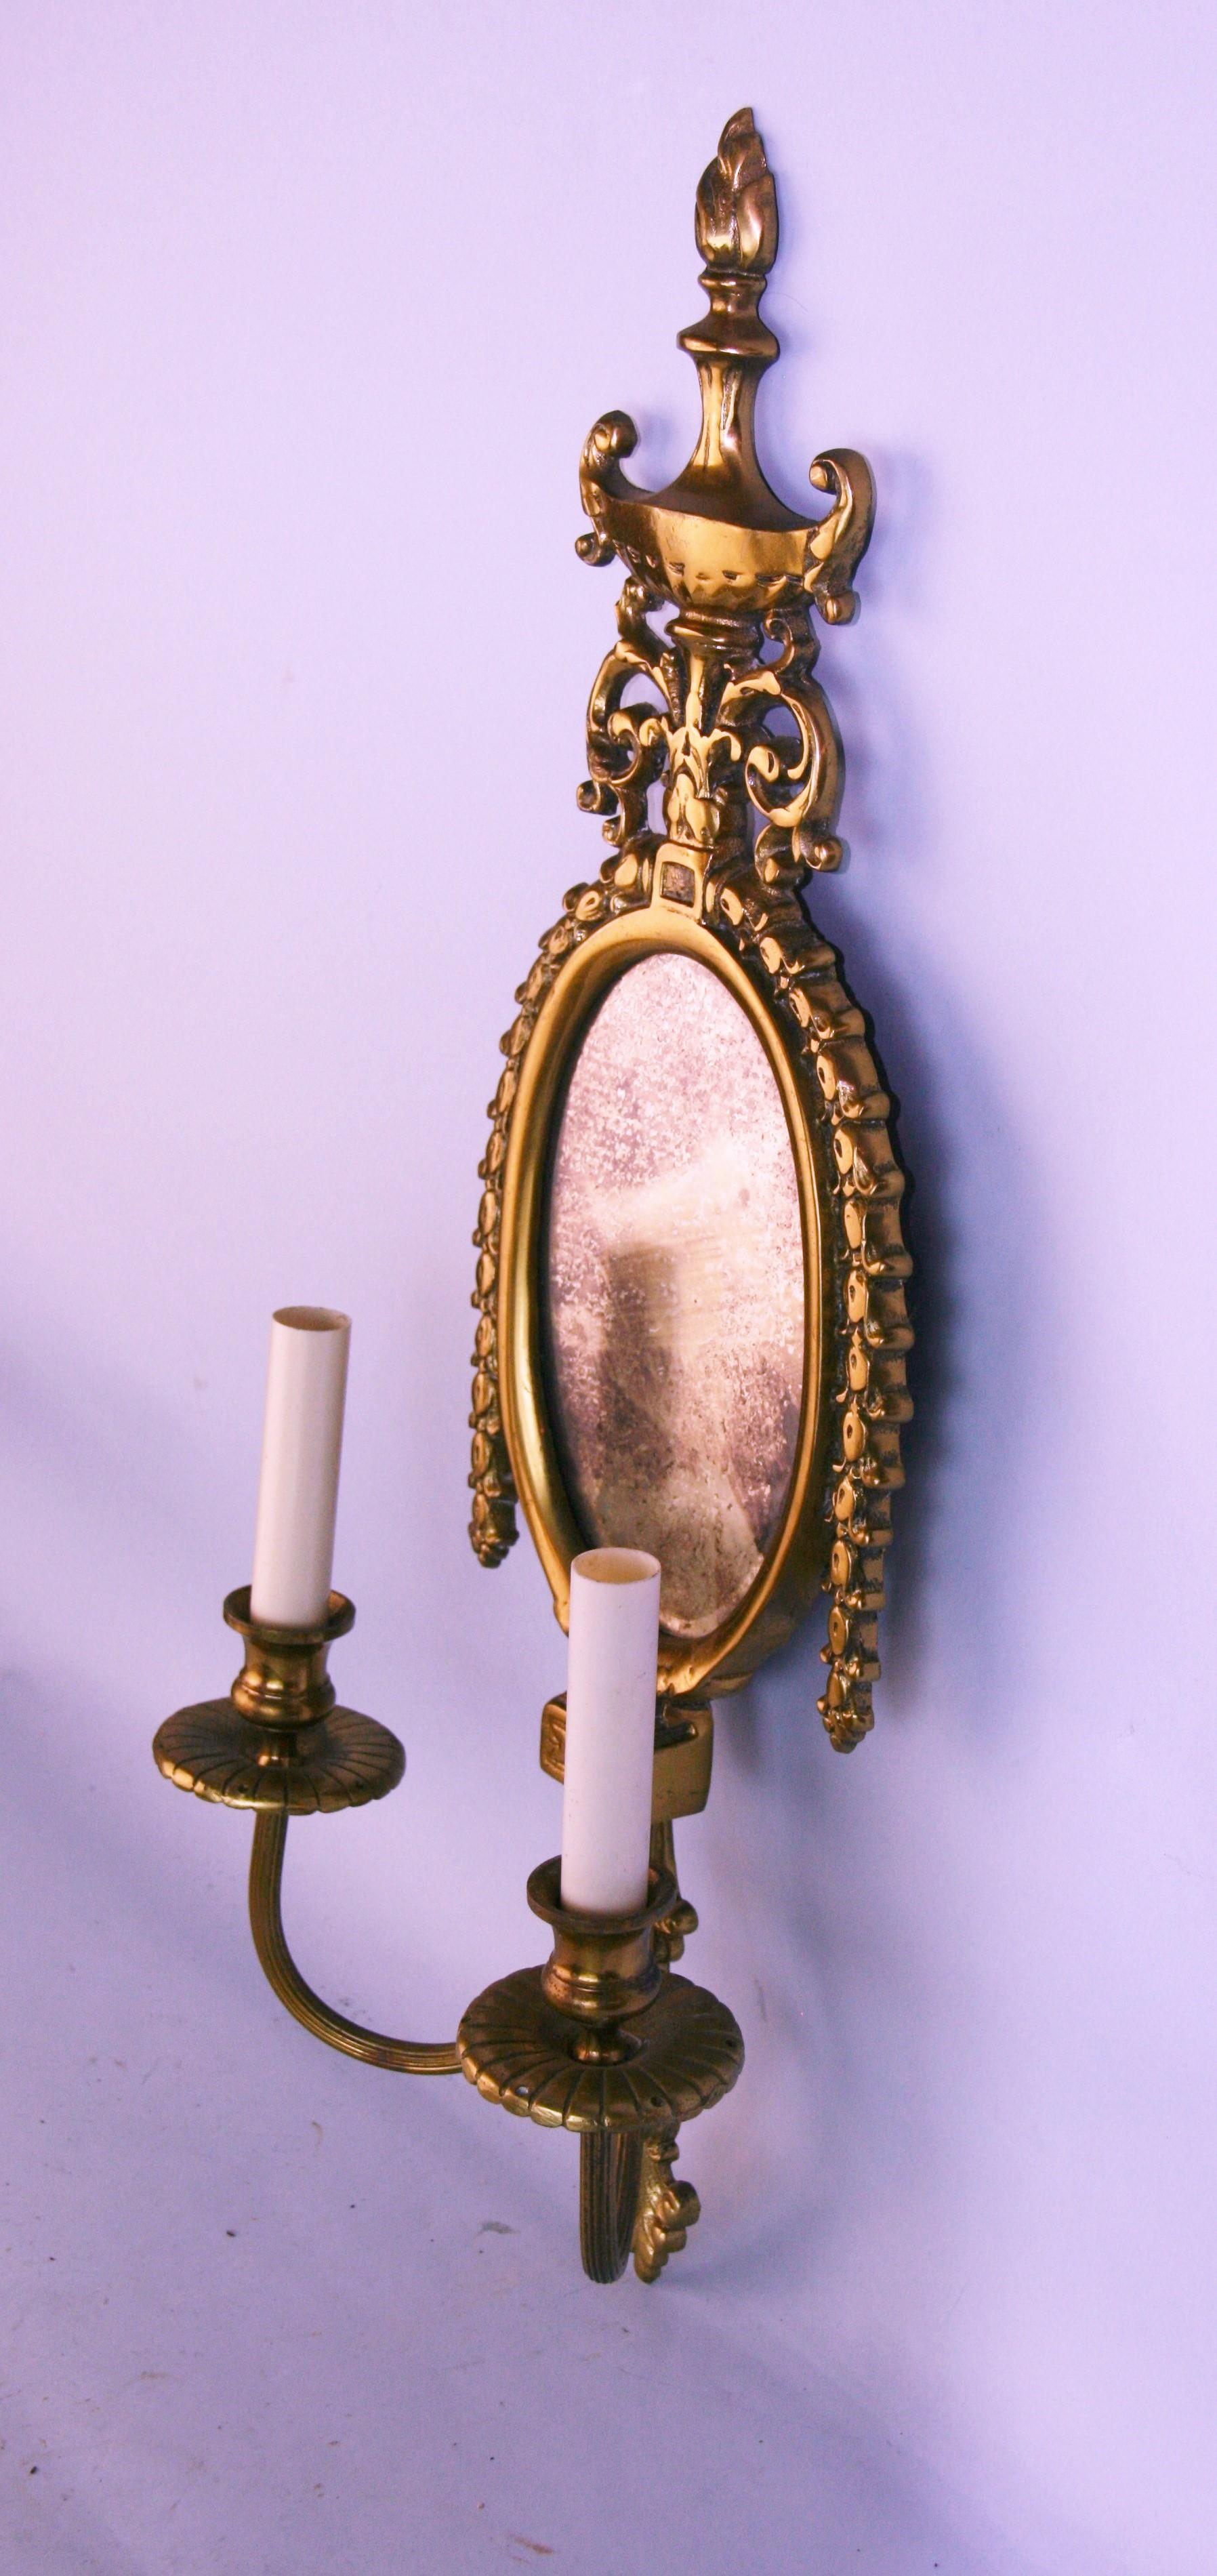 Ornate Brass Two Arm Mirrored Candle Sconces, Pair For Sale 1